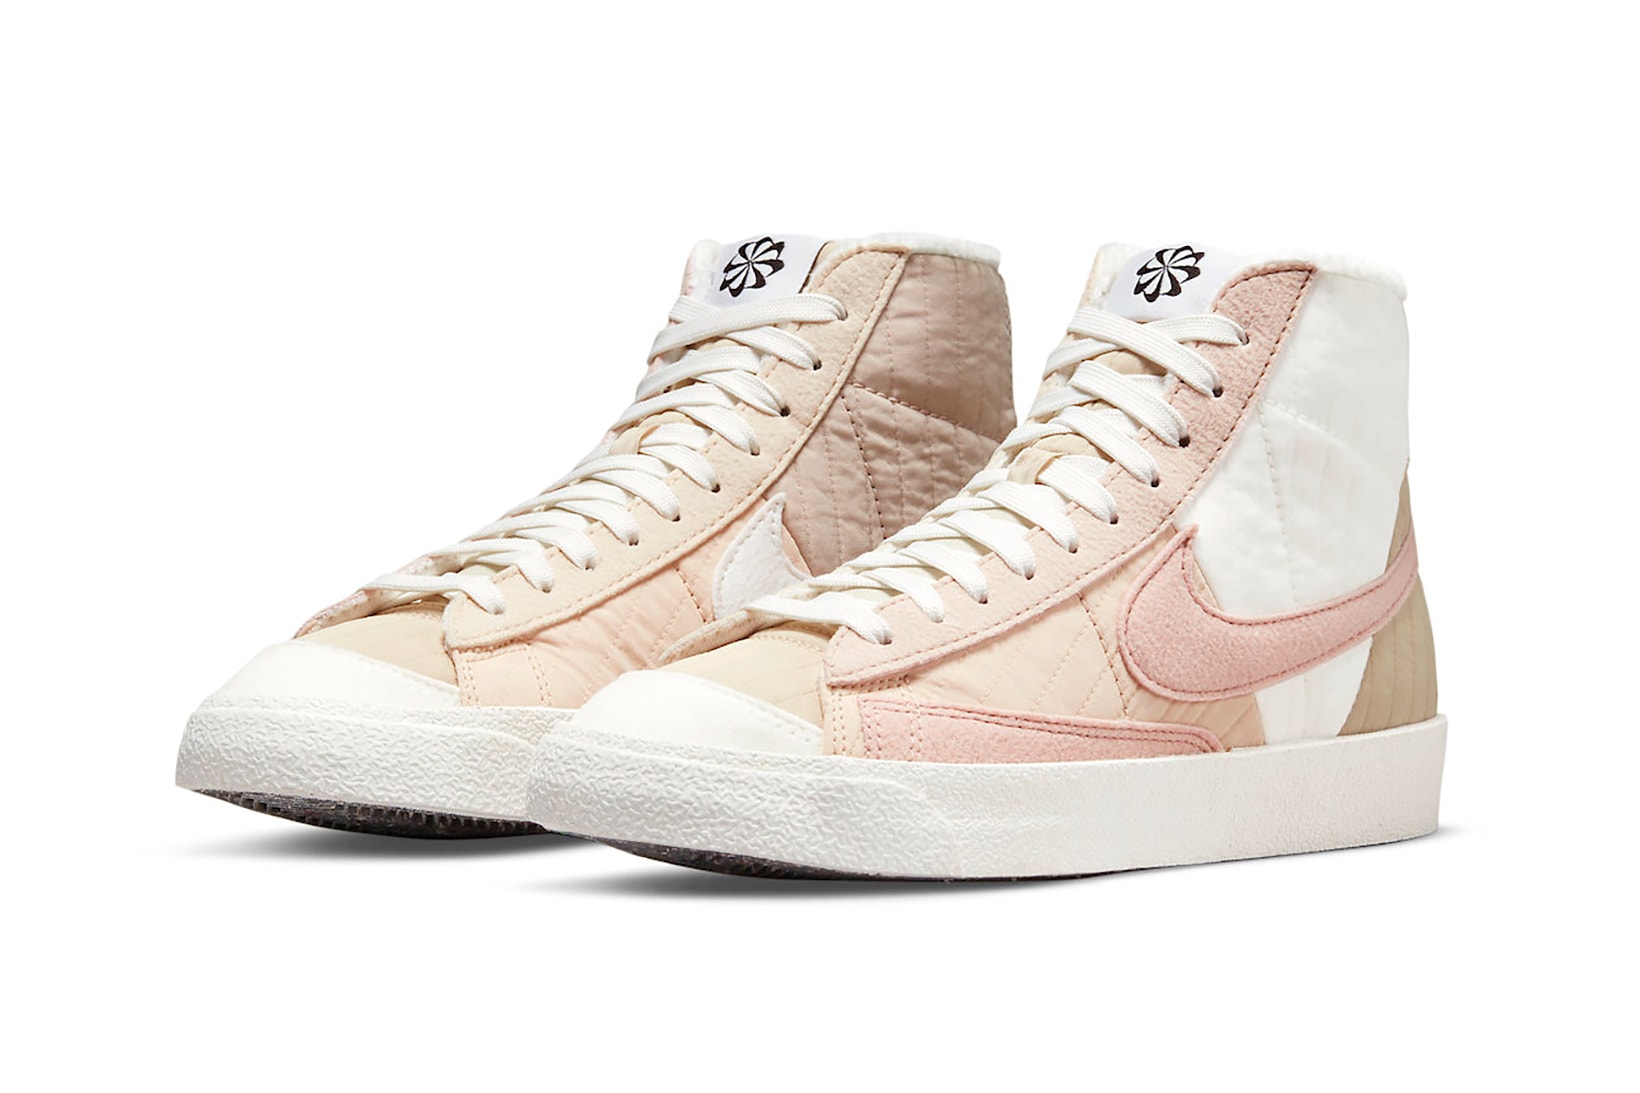 Nike Blazer Mid Toasty Pink White Womens Sneakers Kicks Shoes Footwear Shoes Lateral